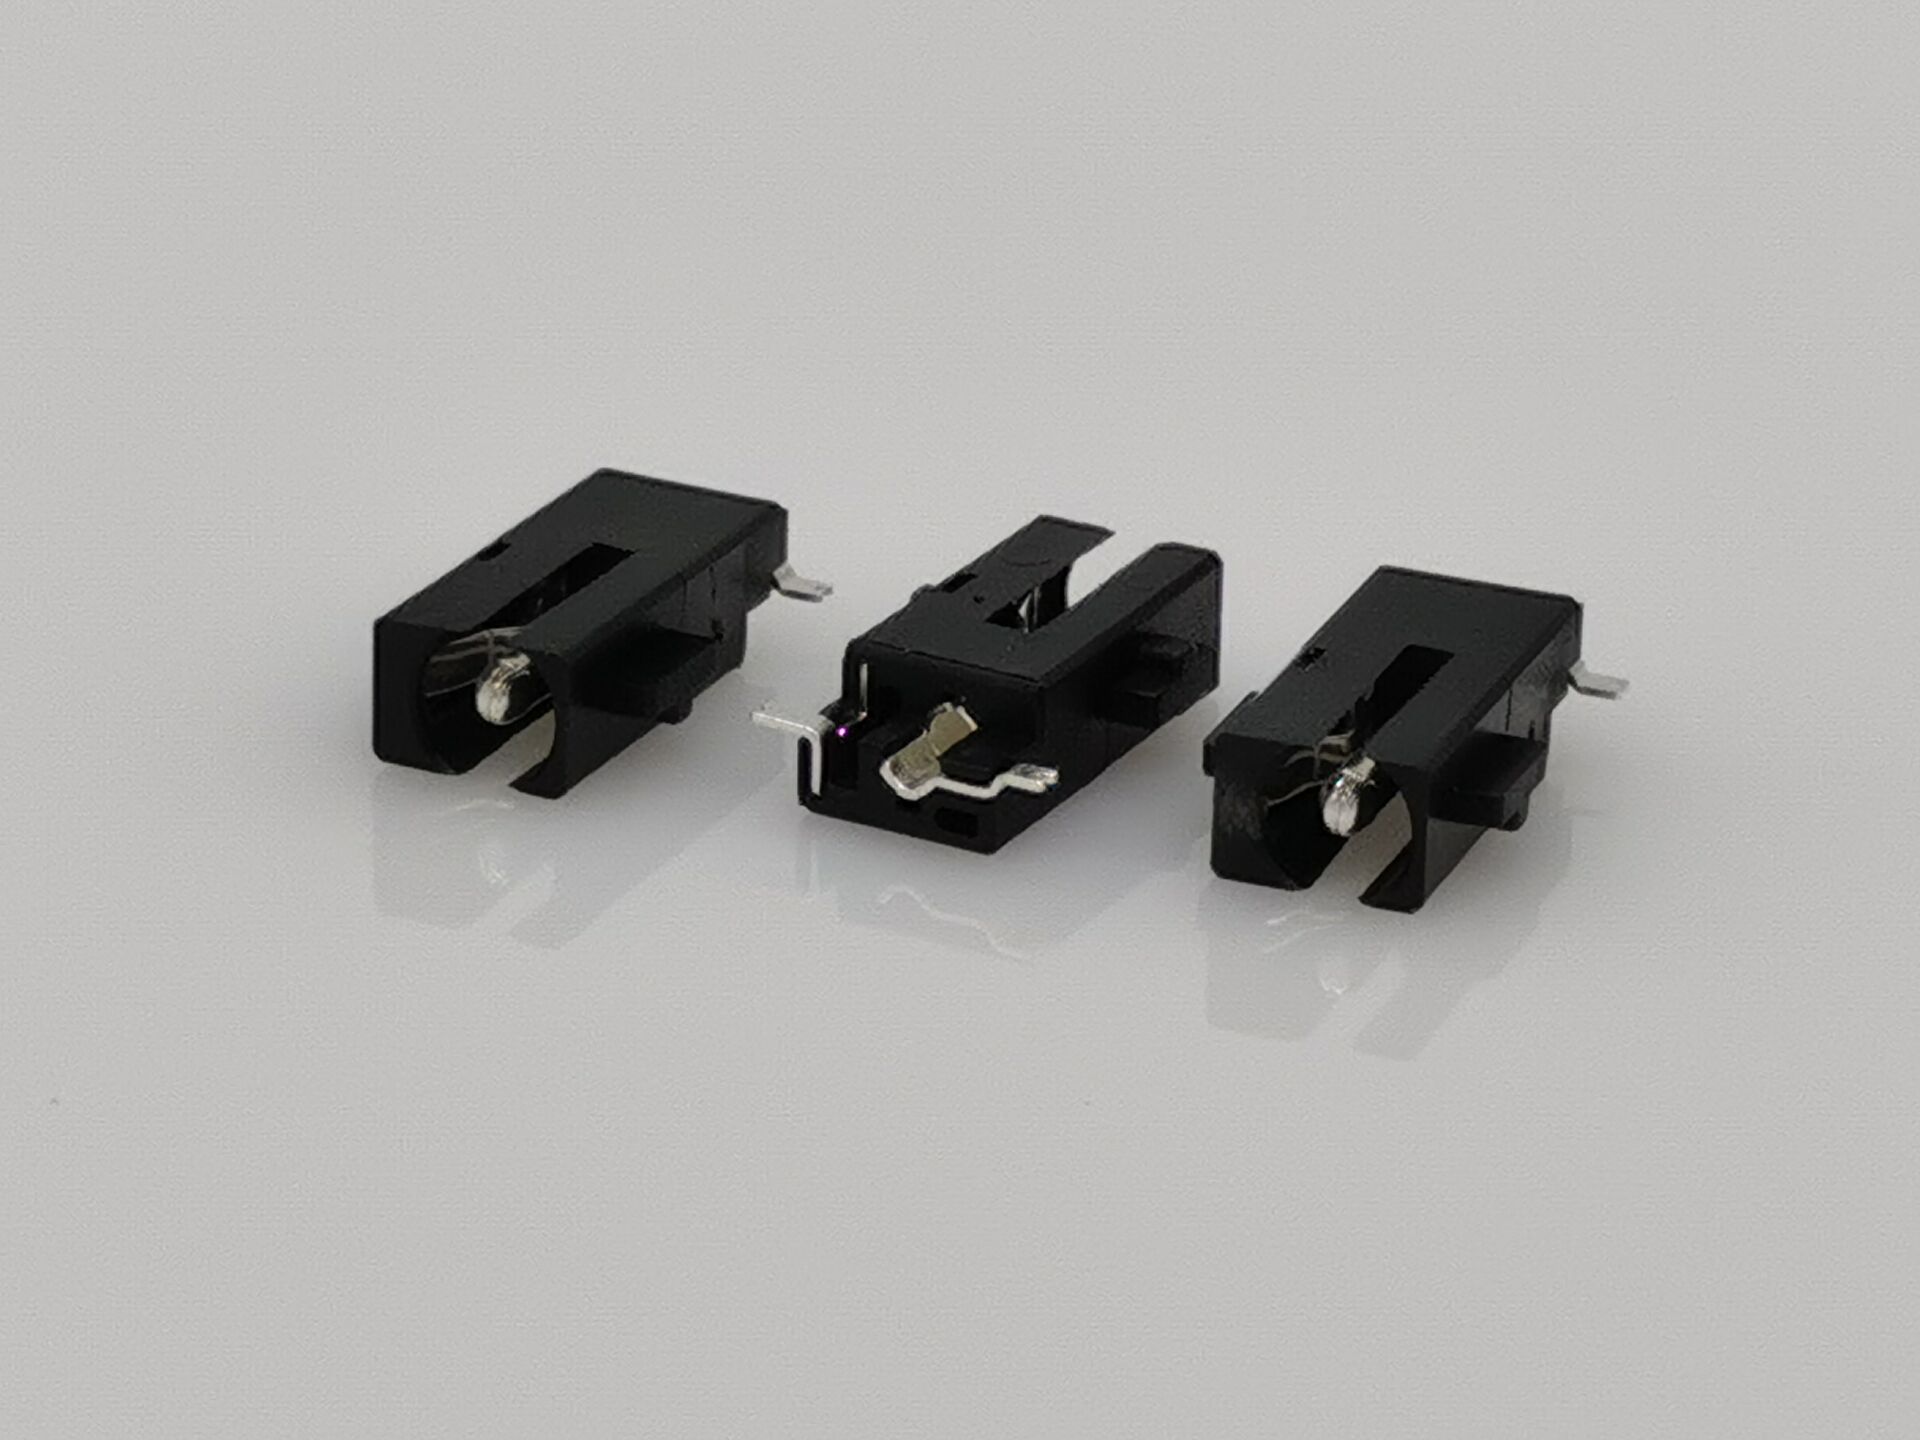 Sink Plate High Current Bus Interface DC-064 Dongjin Aircraft Power Socket 1.65-pin DC Charging Stand JACK